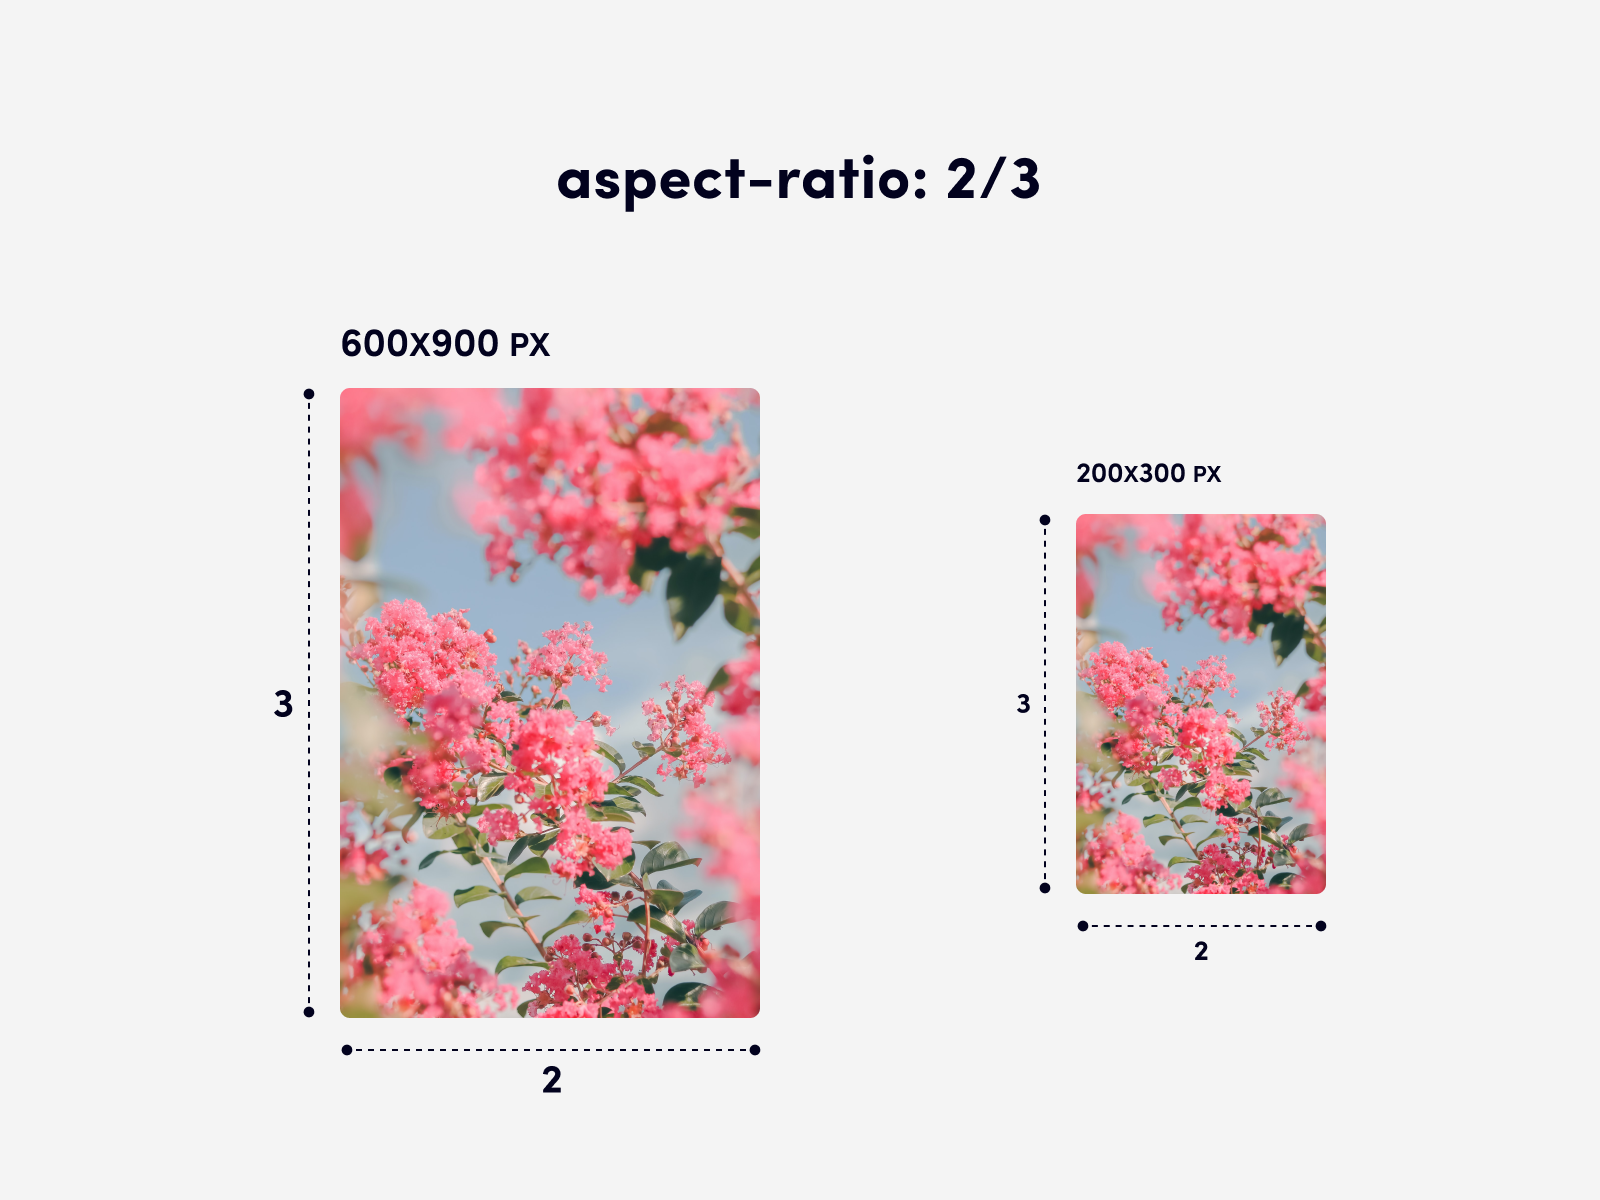 Here you can see two blocks with the same aspect ratio. One is 600 x 900 pixels, and the other is 200 x 300 pixels — with both having a 2:3 aspect ratio